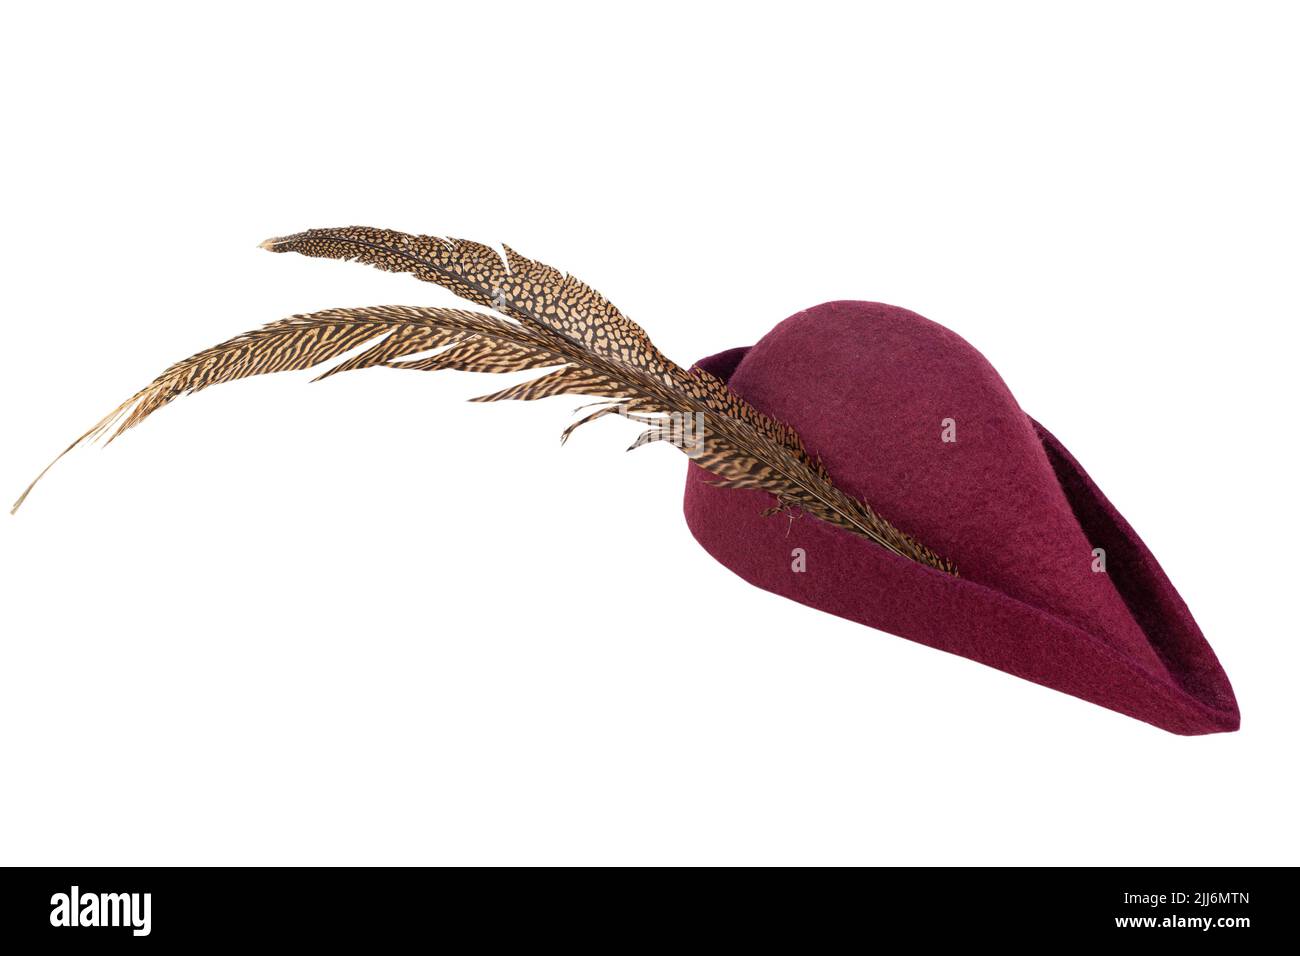 A bycocket or bycoket. Hat that was fashionable for both men and women in Western Europe from the 13th to the 16th century. Isolated on white backgrou Stock Photo